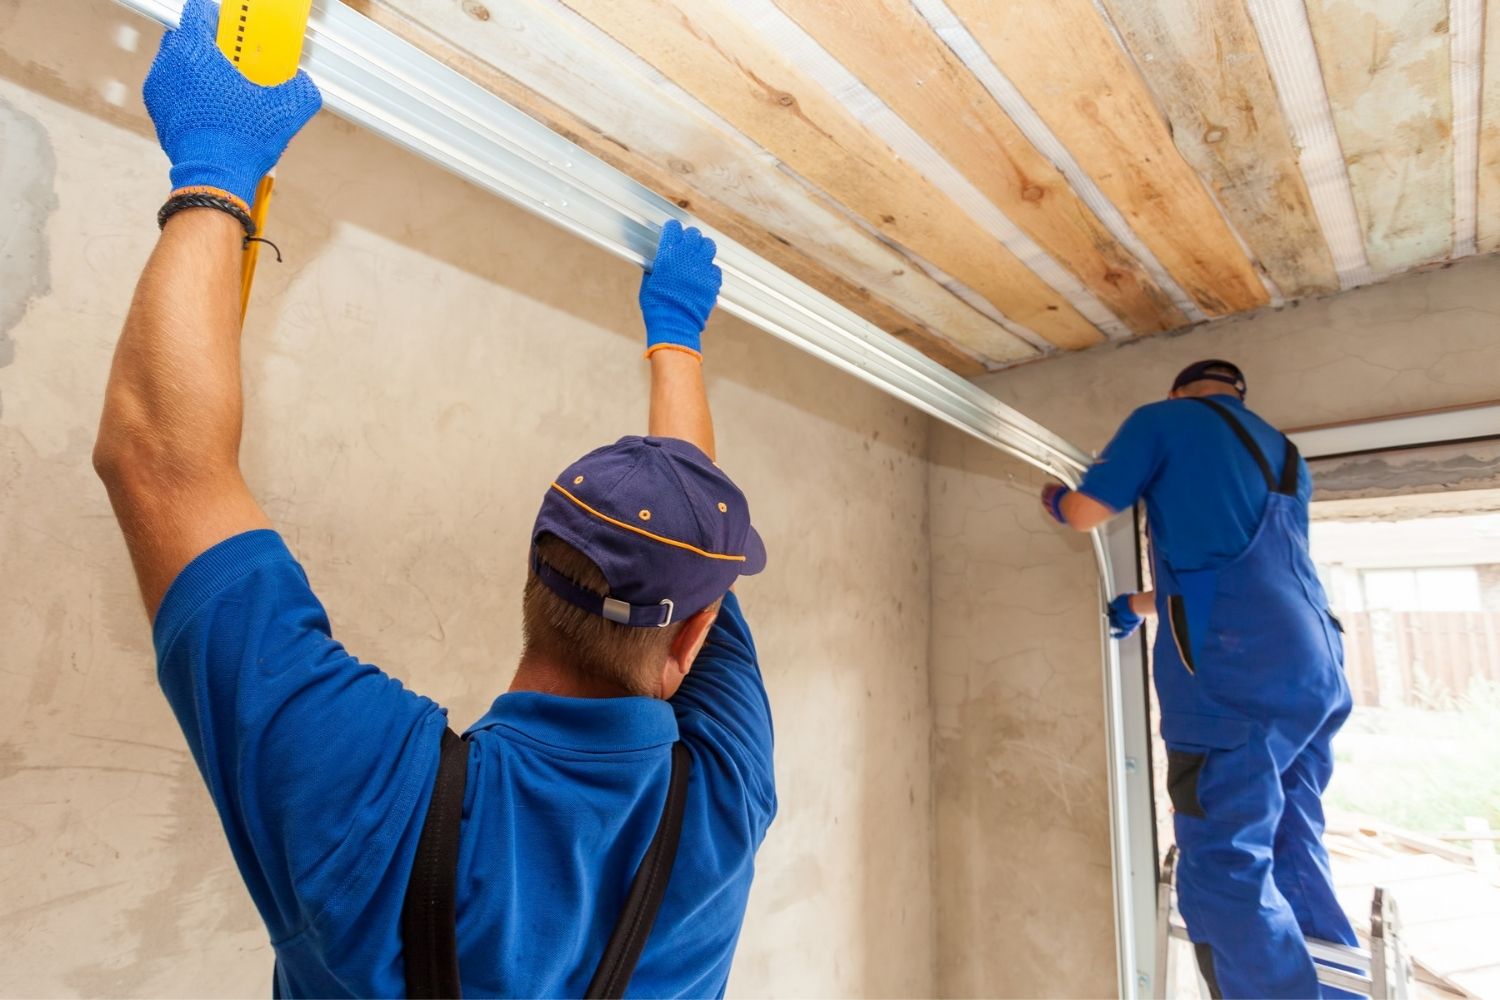 Two workers dressed in blue renovate a garage.